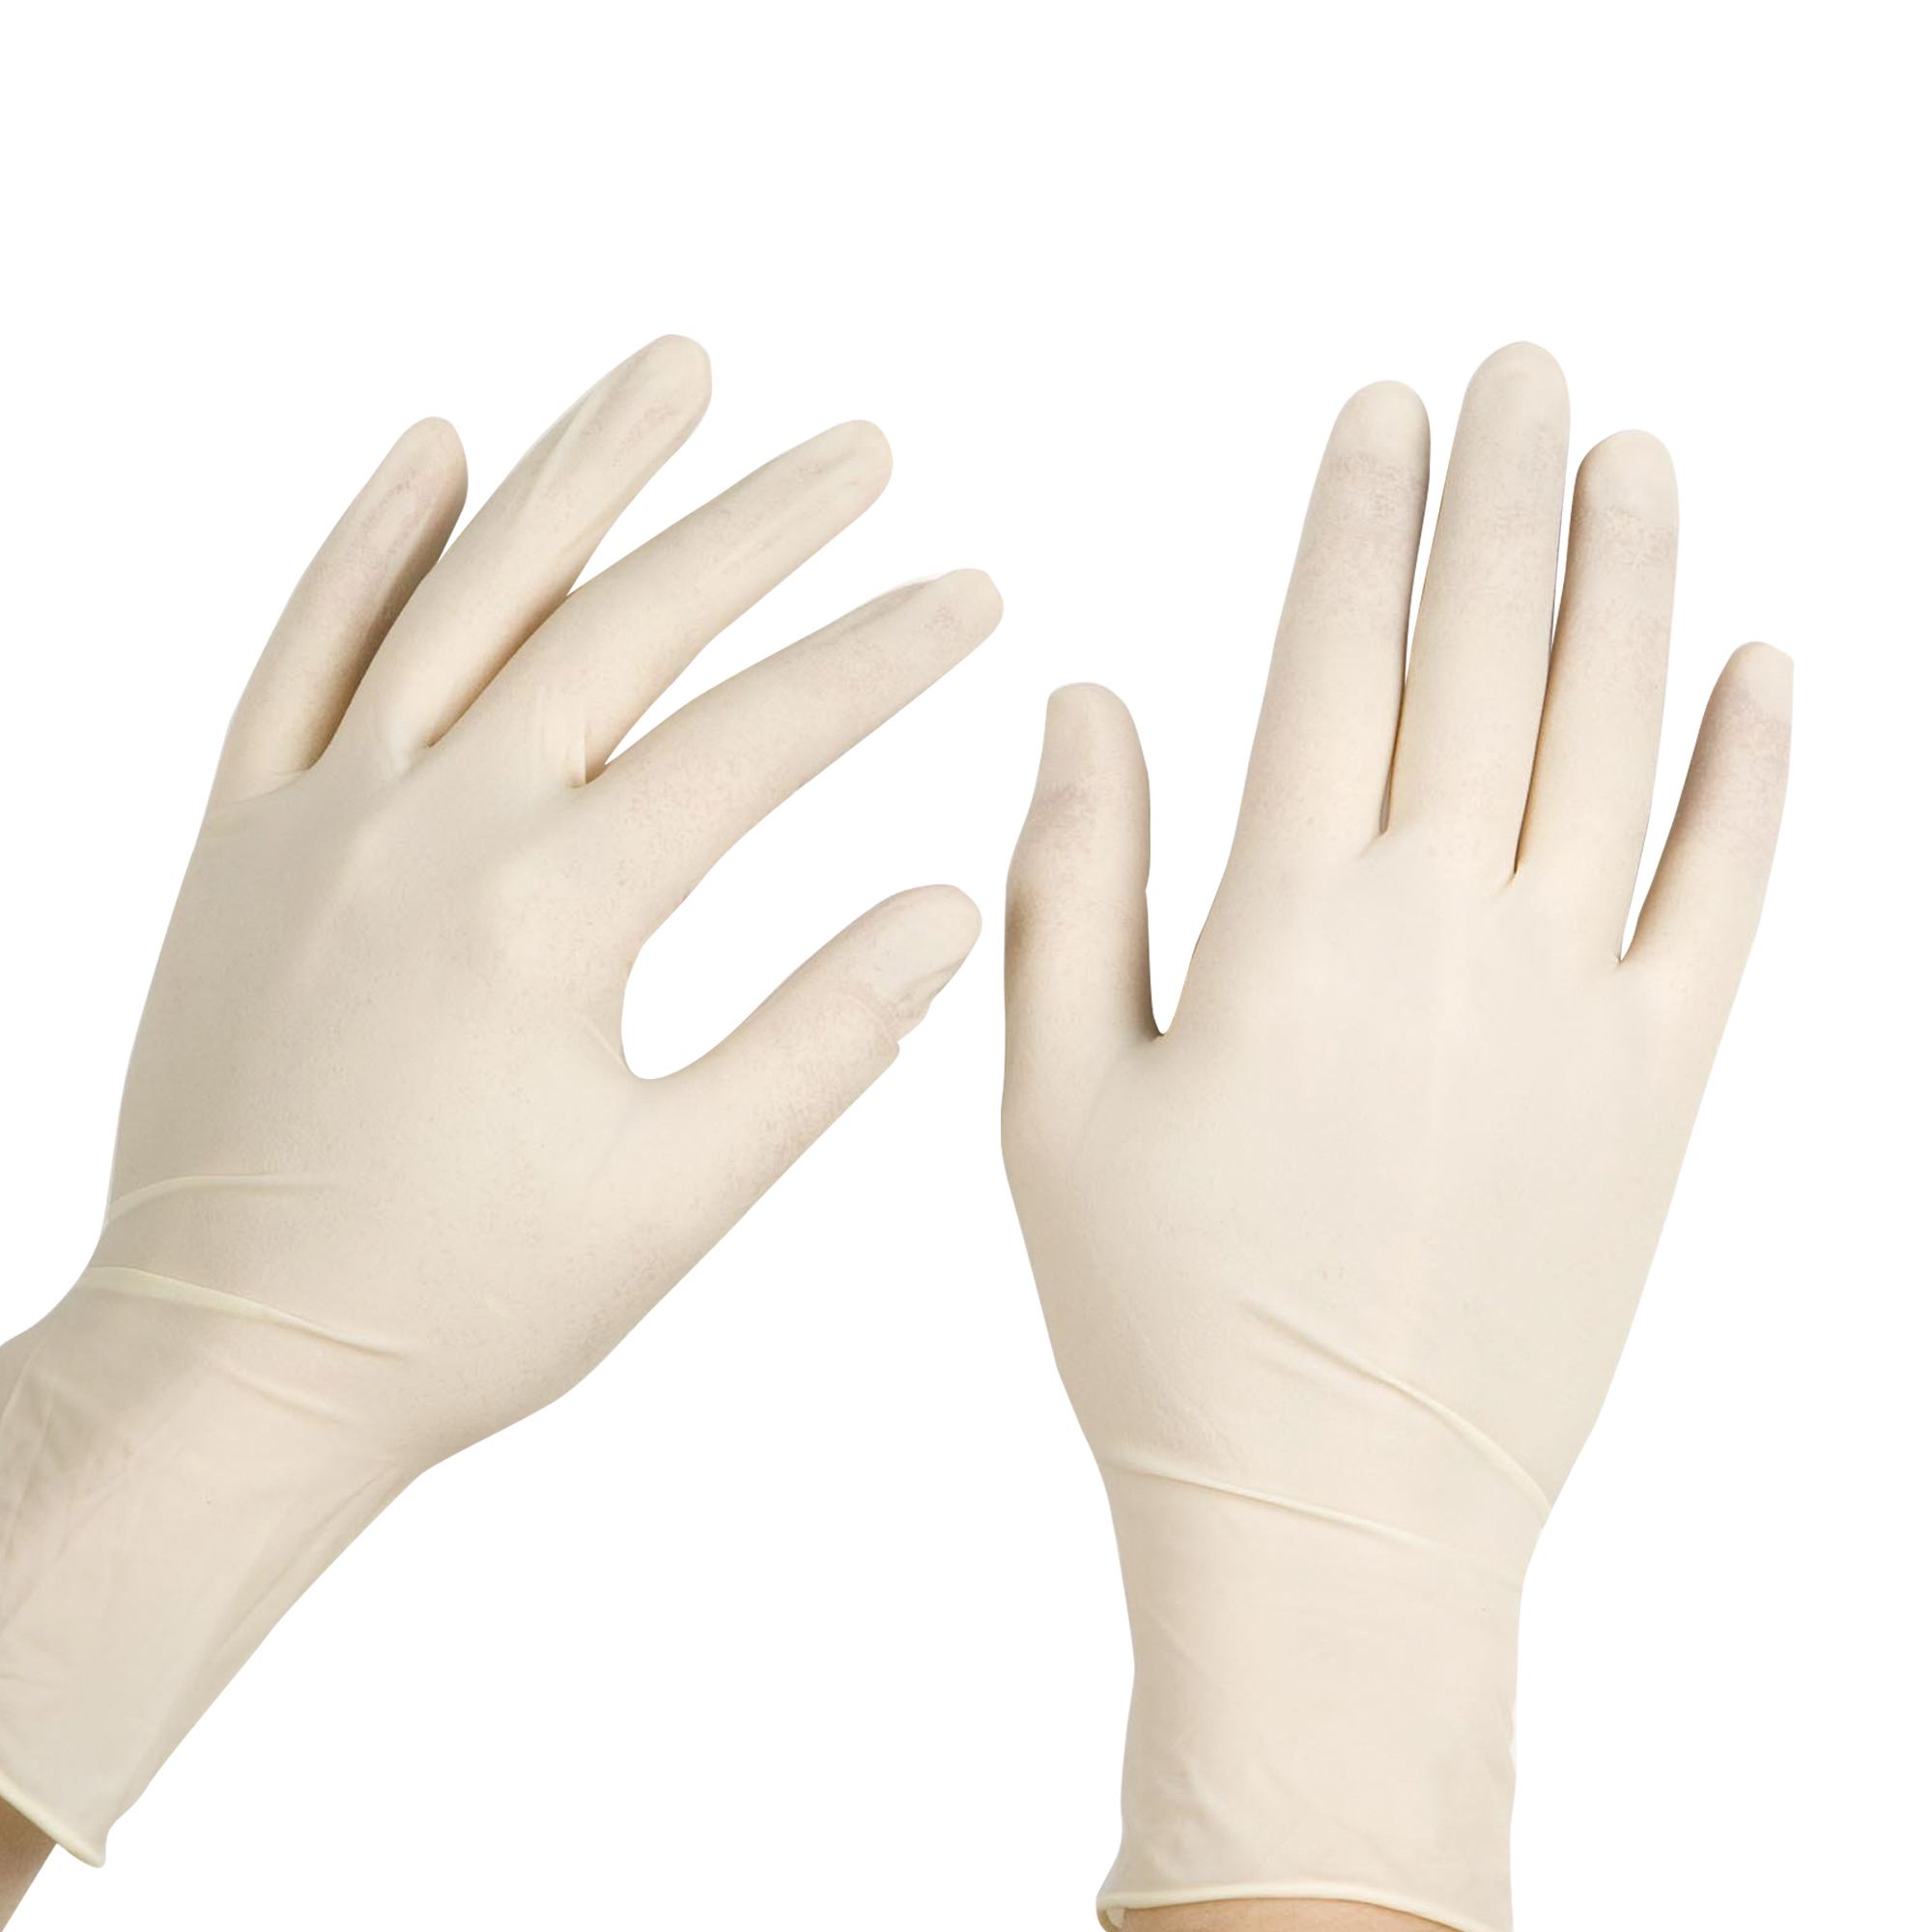 Gloves Synthetic (Stretch Vinyl) Powder Free Small - Pack 100 - Case 10